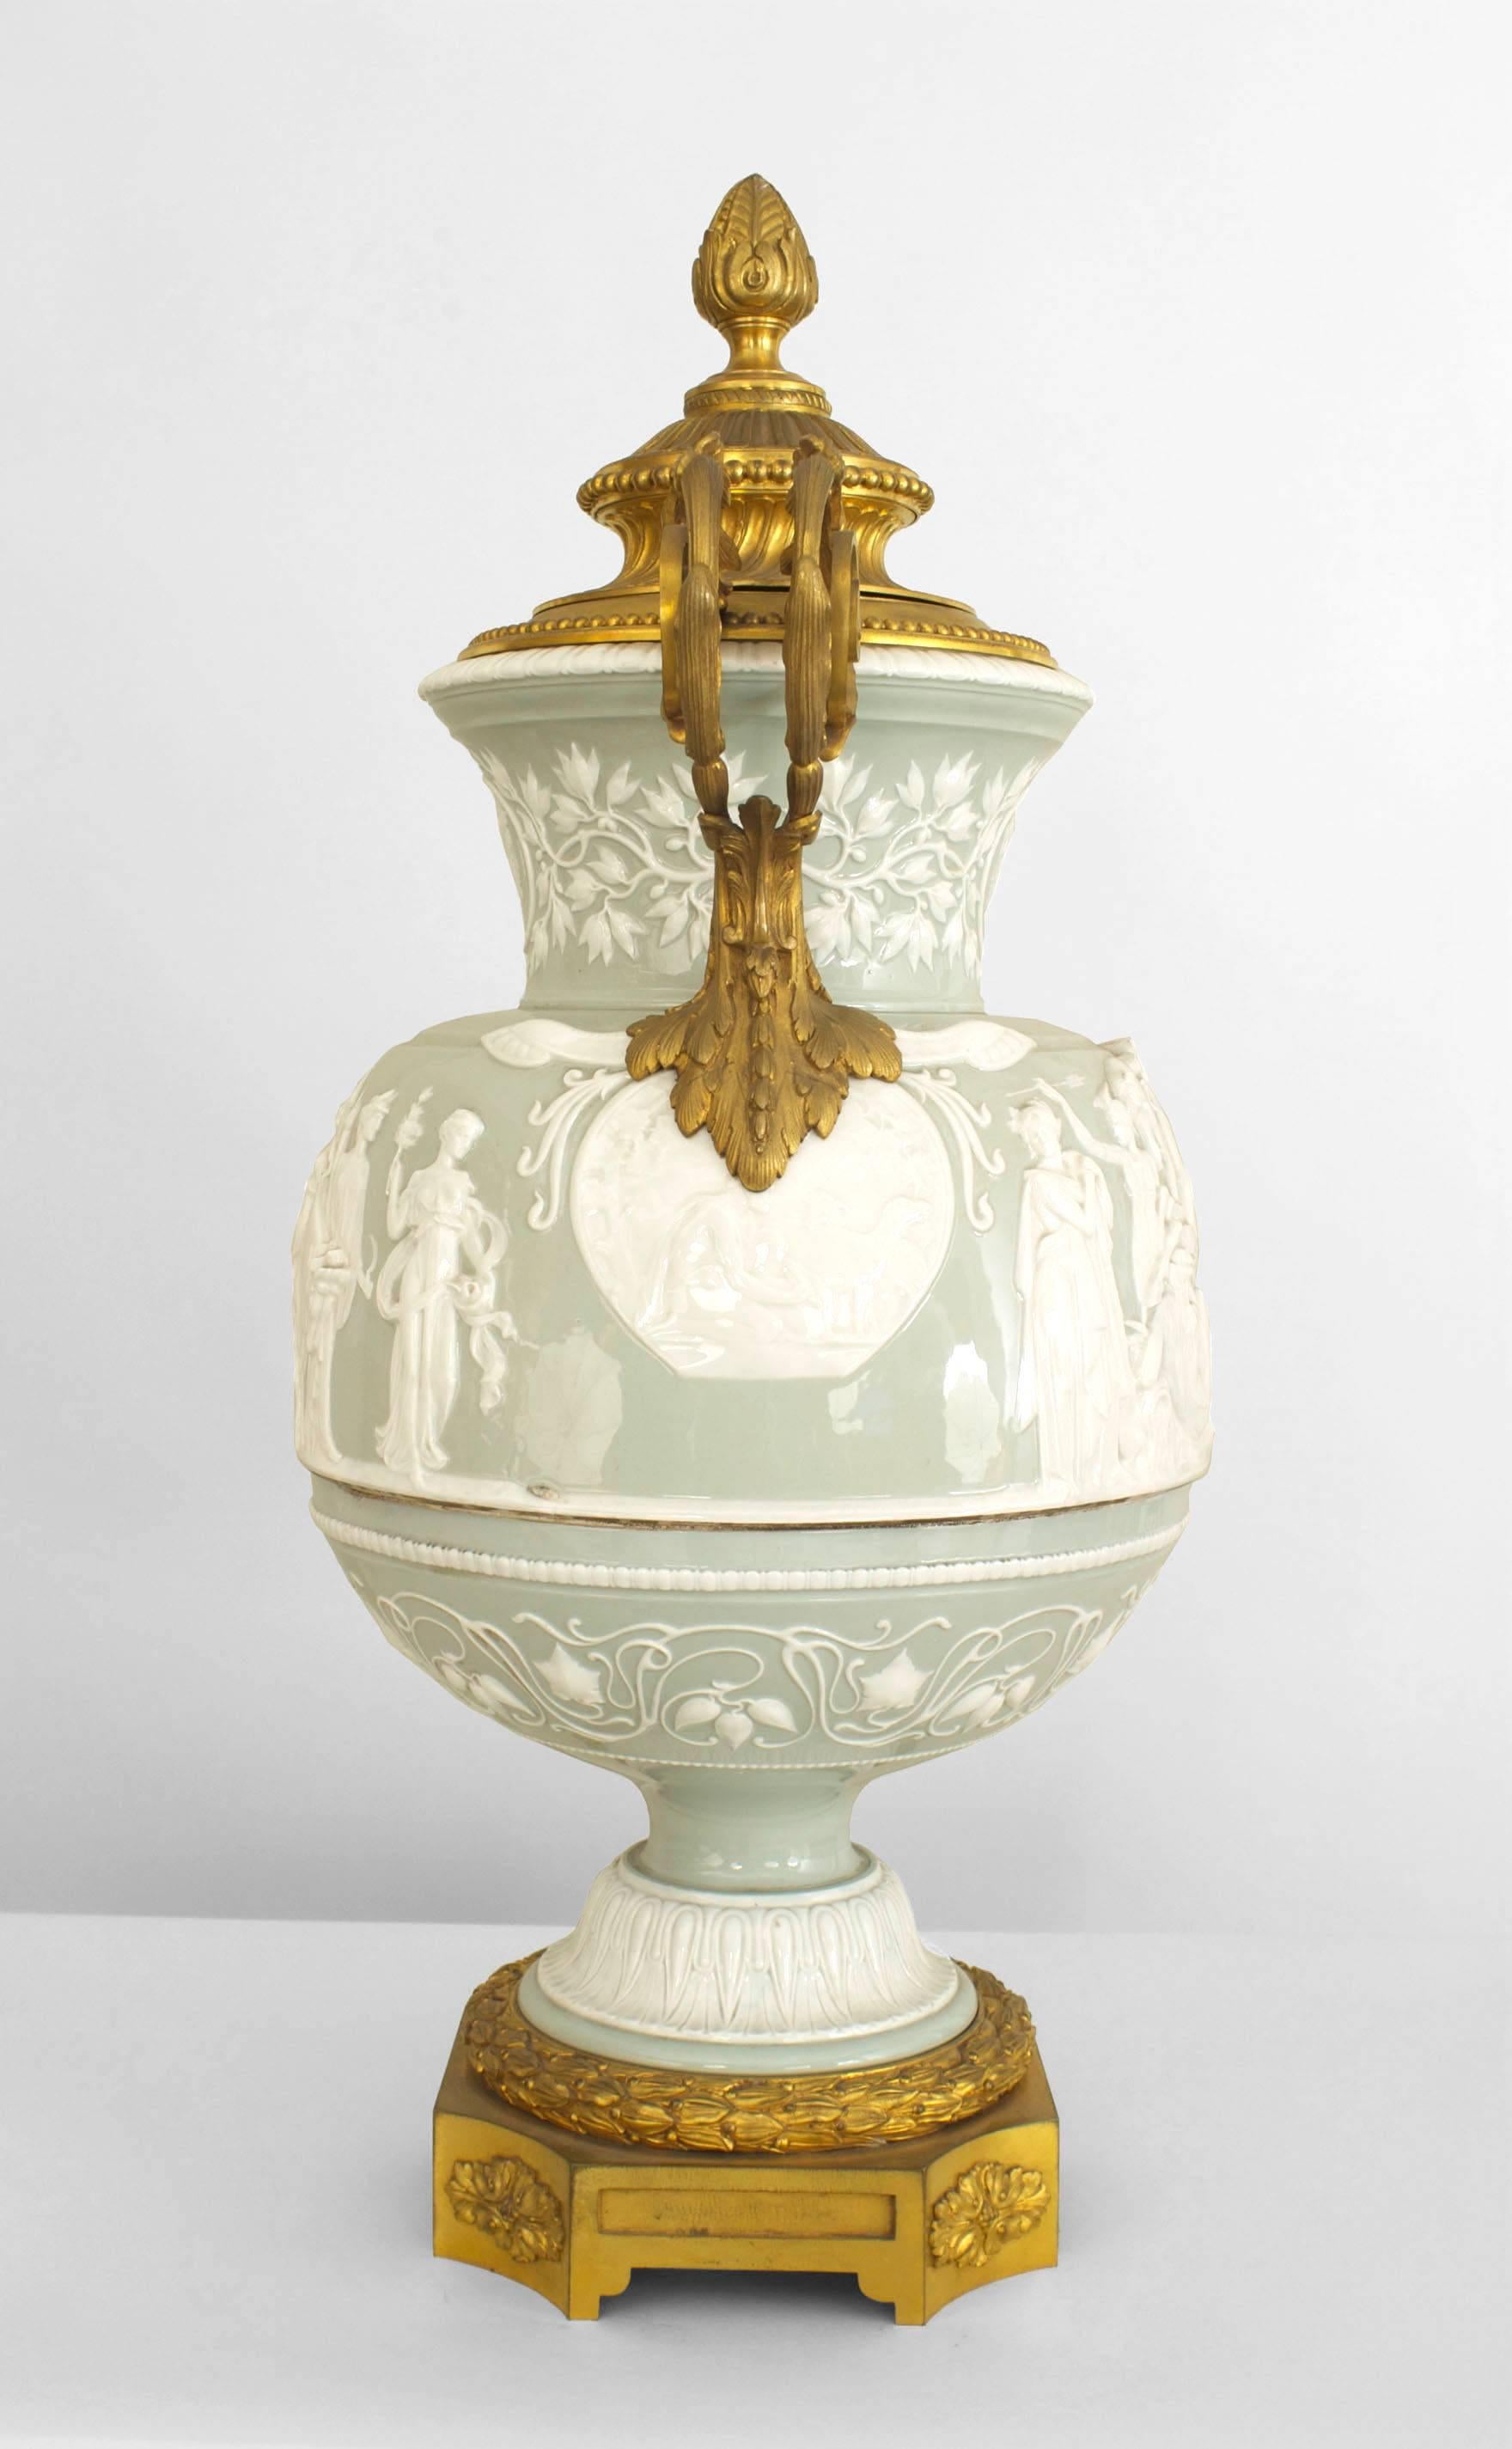 Neoclassical Revival French Victorian Celadon and White Porcelain Palace Vase For Sale